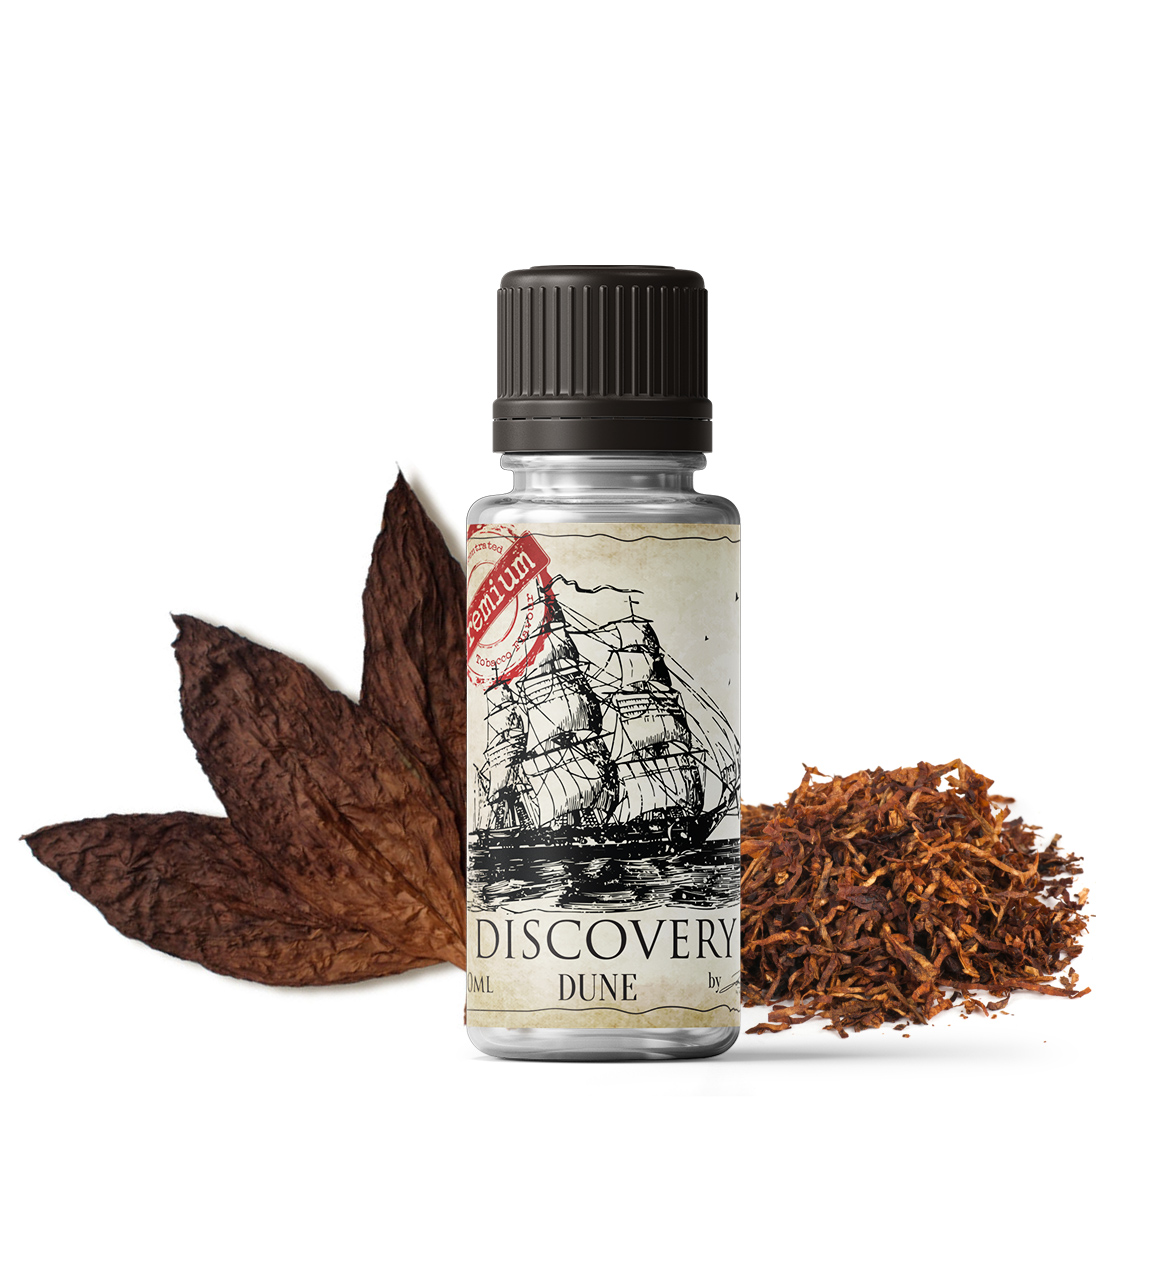 DISCOVERY AROMA DUNE HILL 10 ml